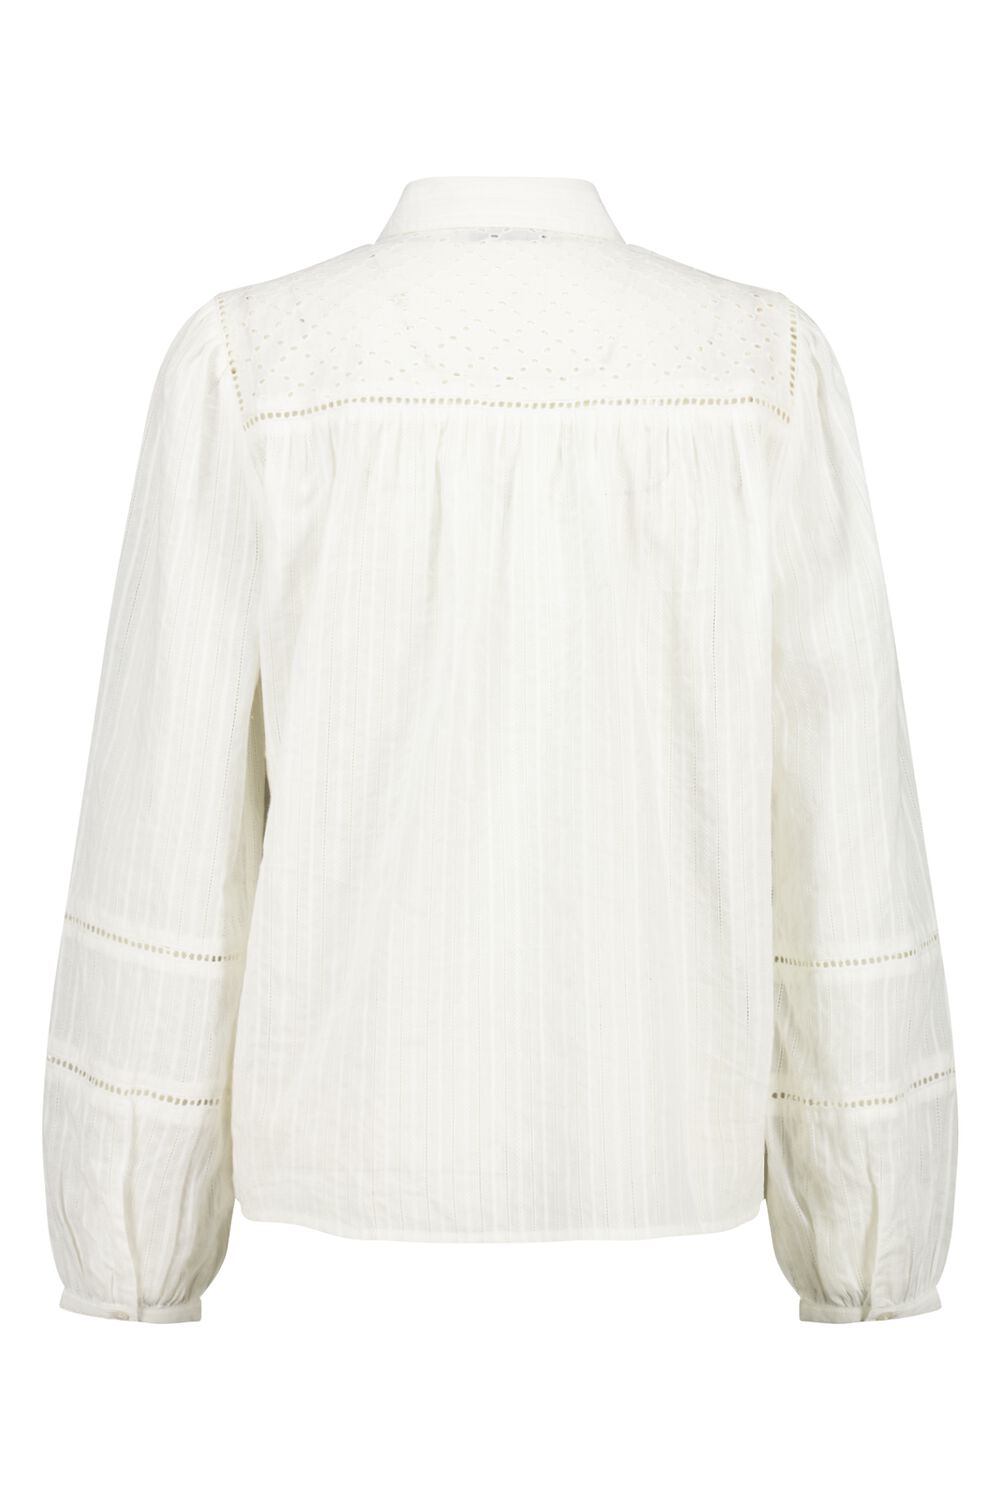 America Today Dames Blouse Blanca Wit